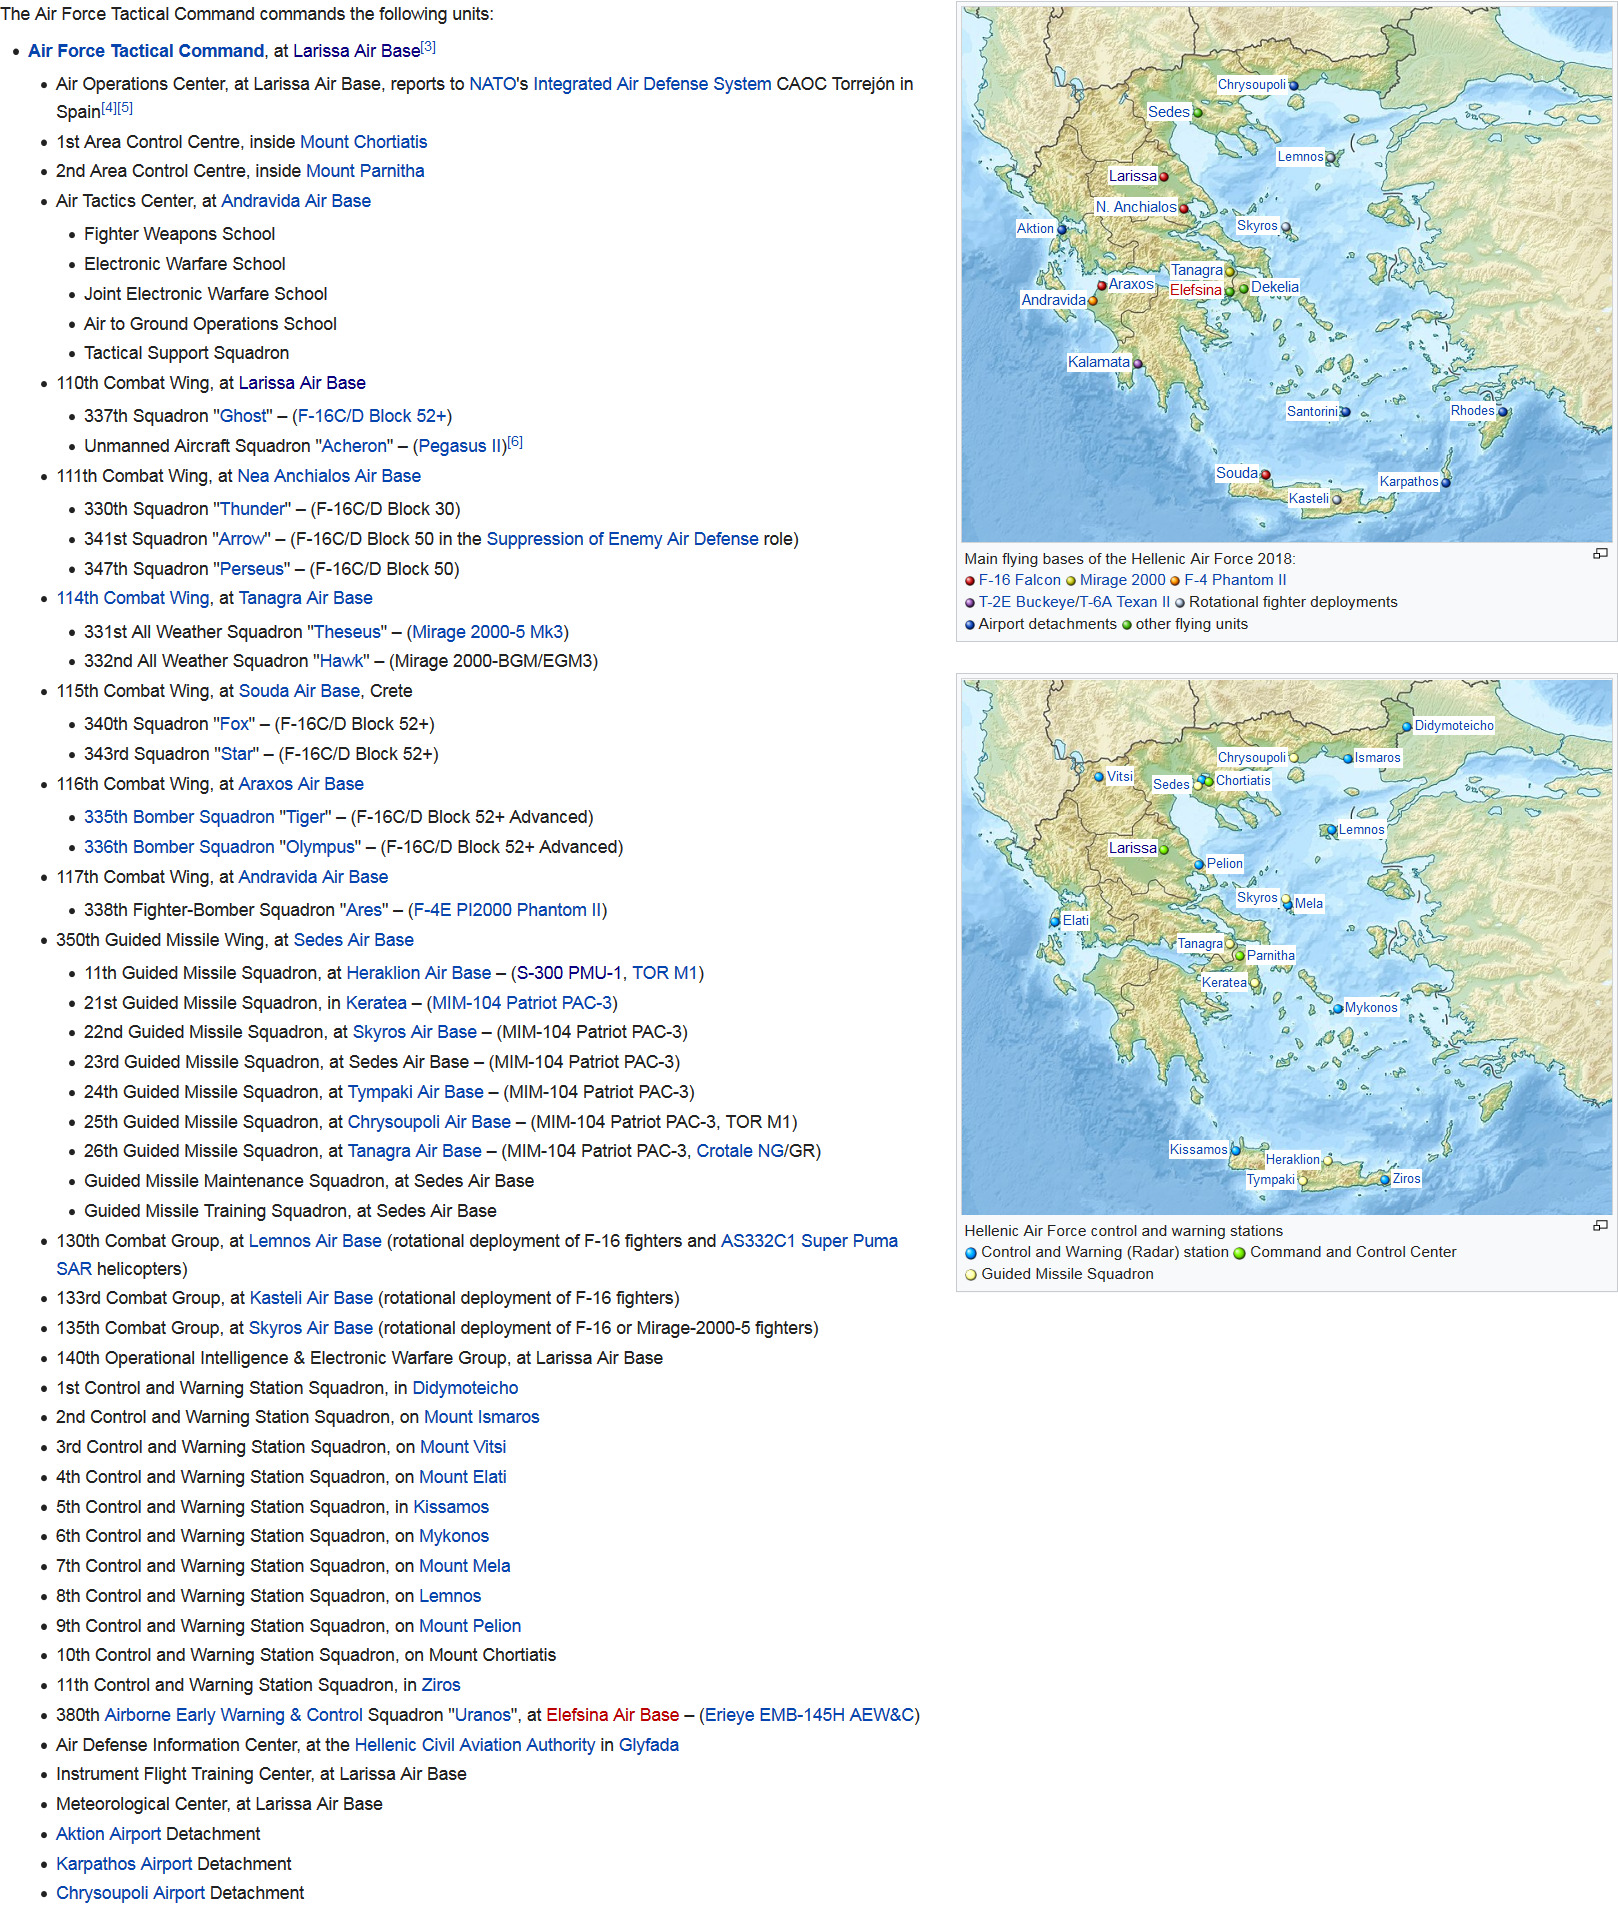 Screenshot_2019-04-21 Structure of the Hellenic Air Force - Wikipedia.jpg